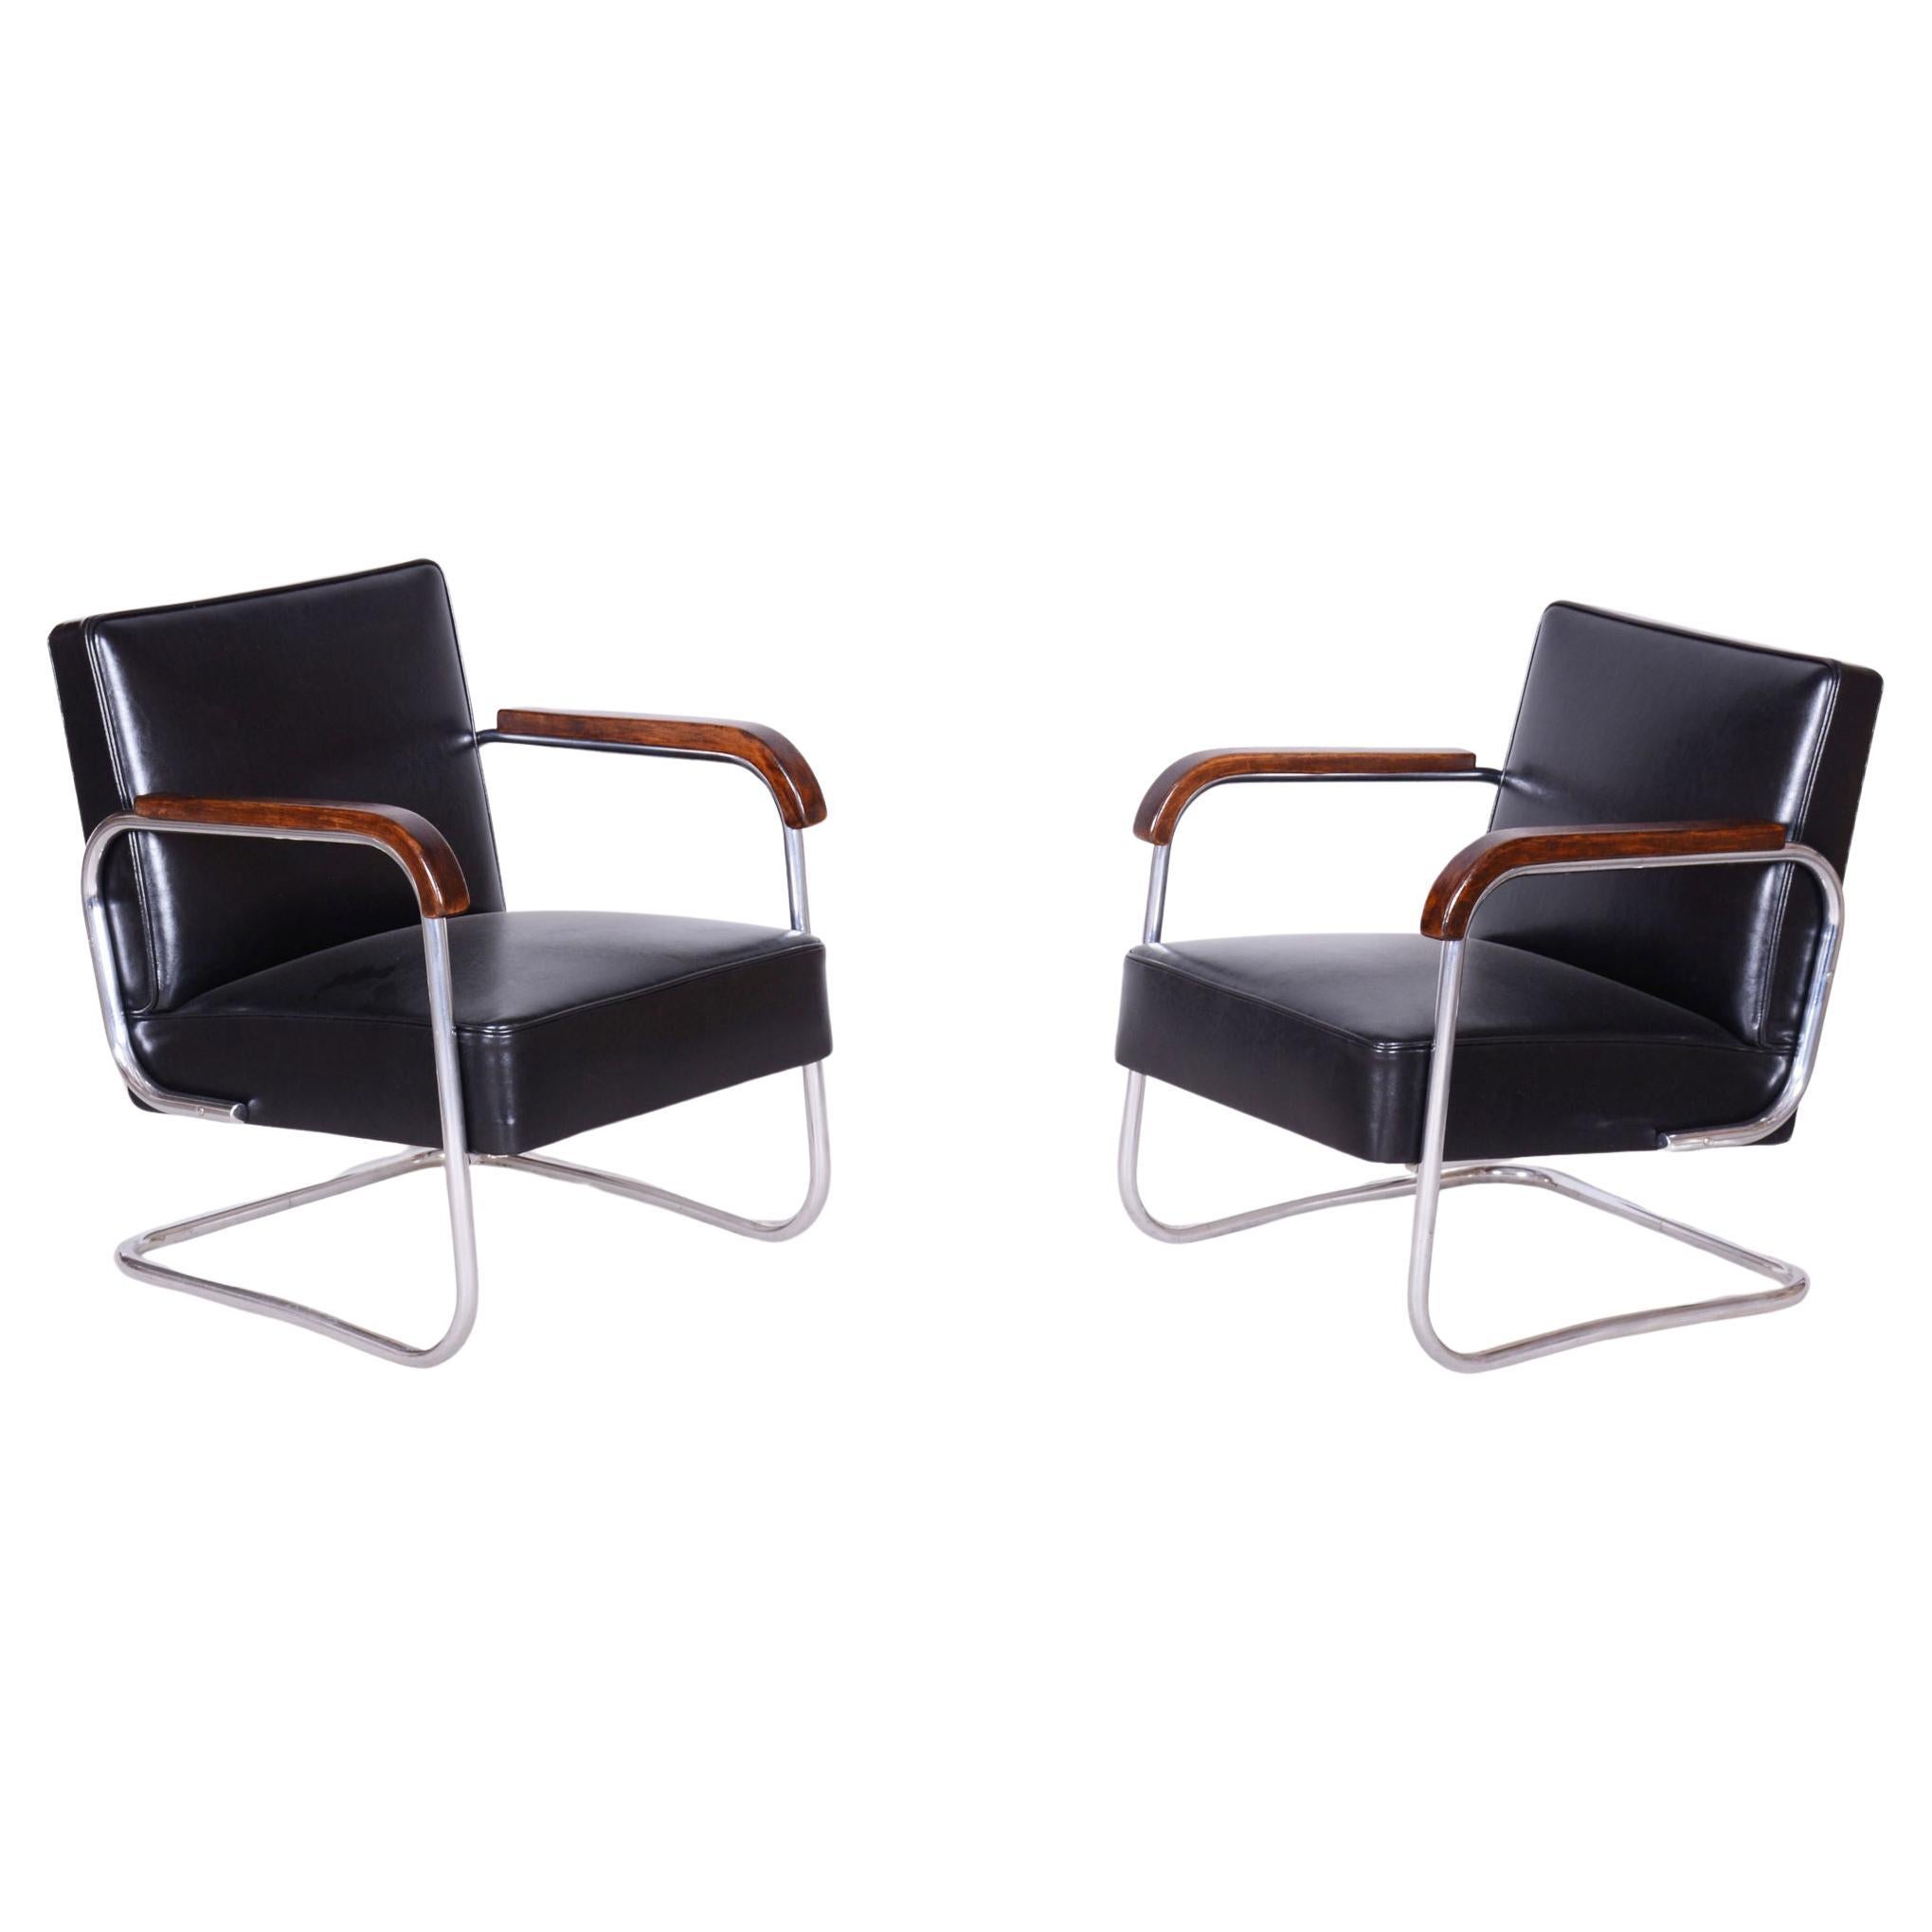 Set of Two Restored Bauhaus Armchairs, Chrome, Beech, Cowhide, Czech, 1930s For Sale